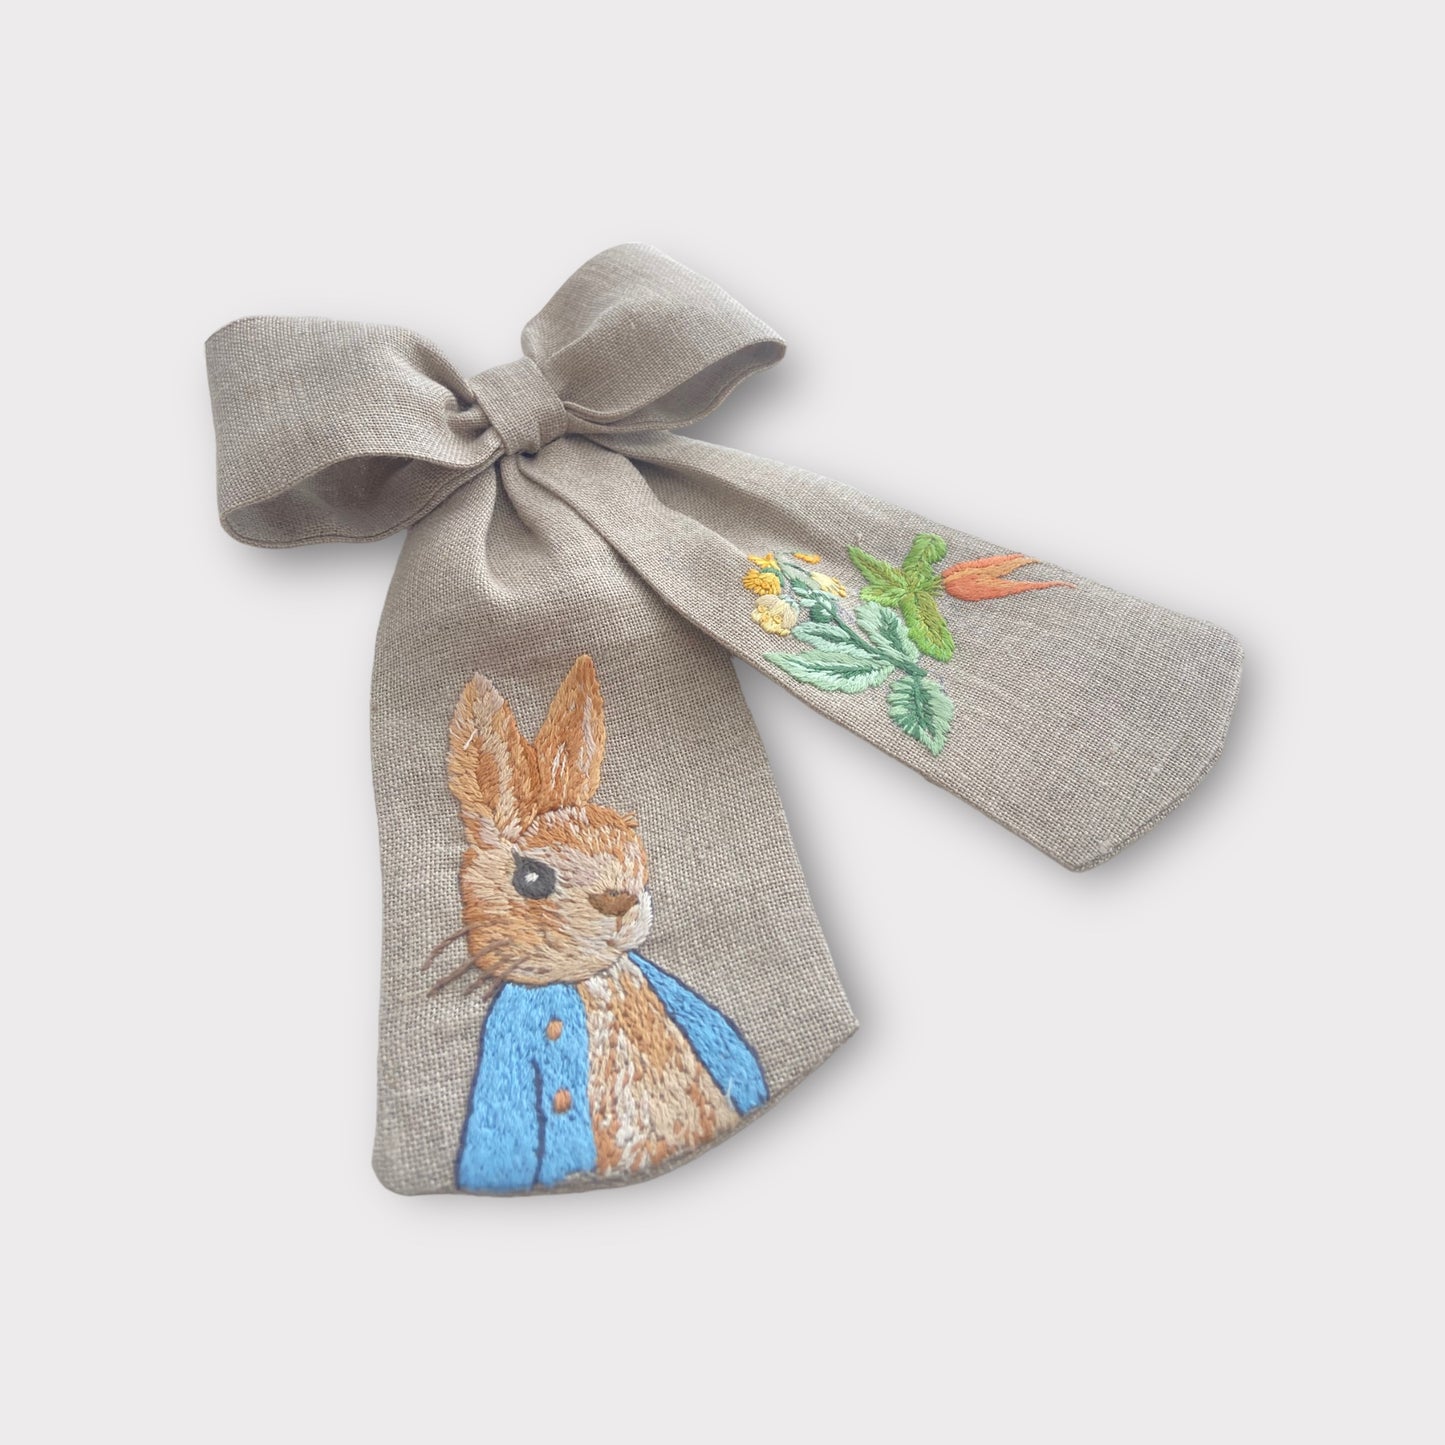 Hair Bow with Metal Clip - Hand Embroidery Peter Rabbit and Bunch of Carrots in Pure Linen